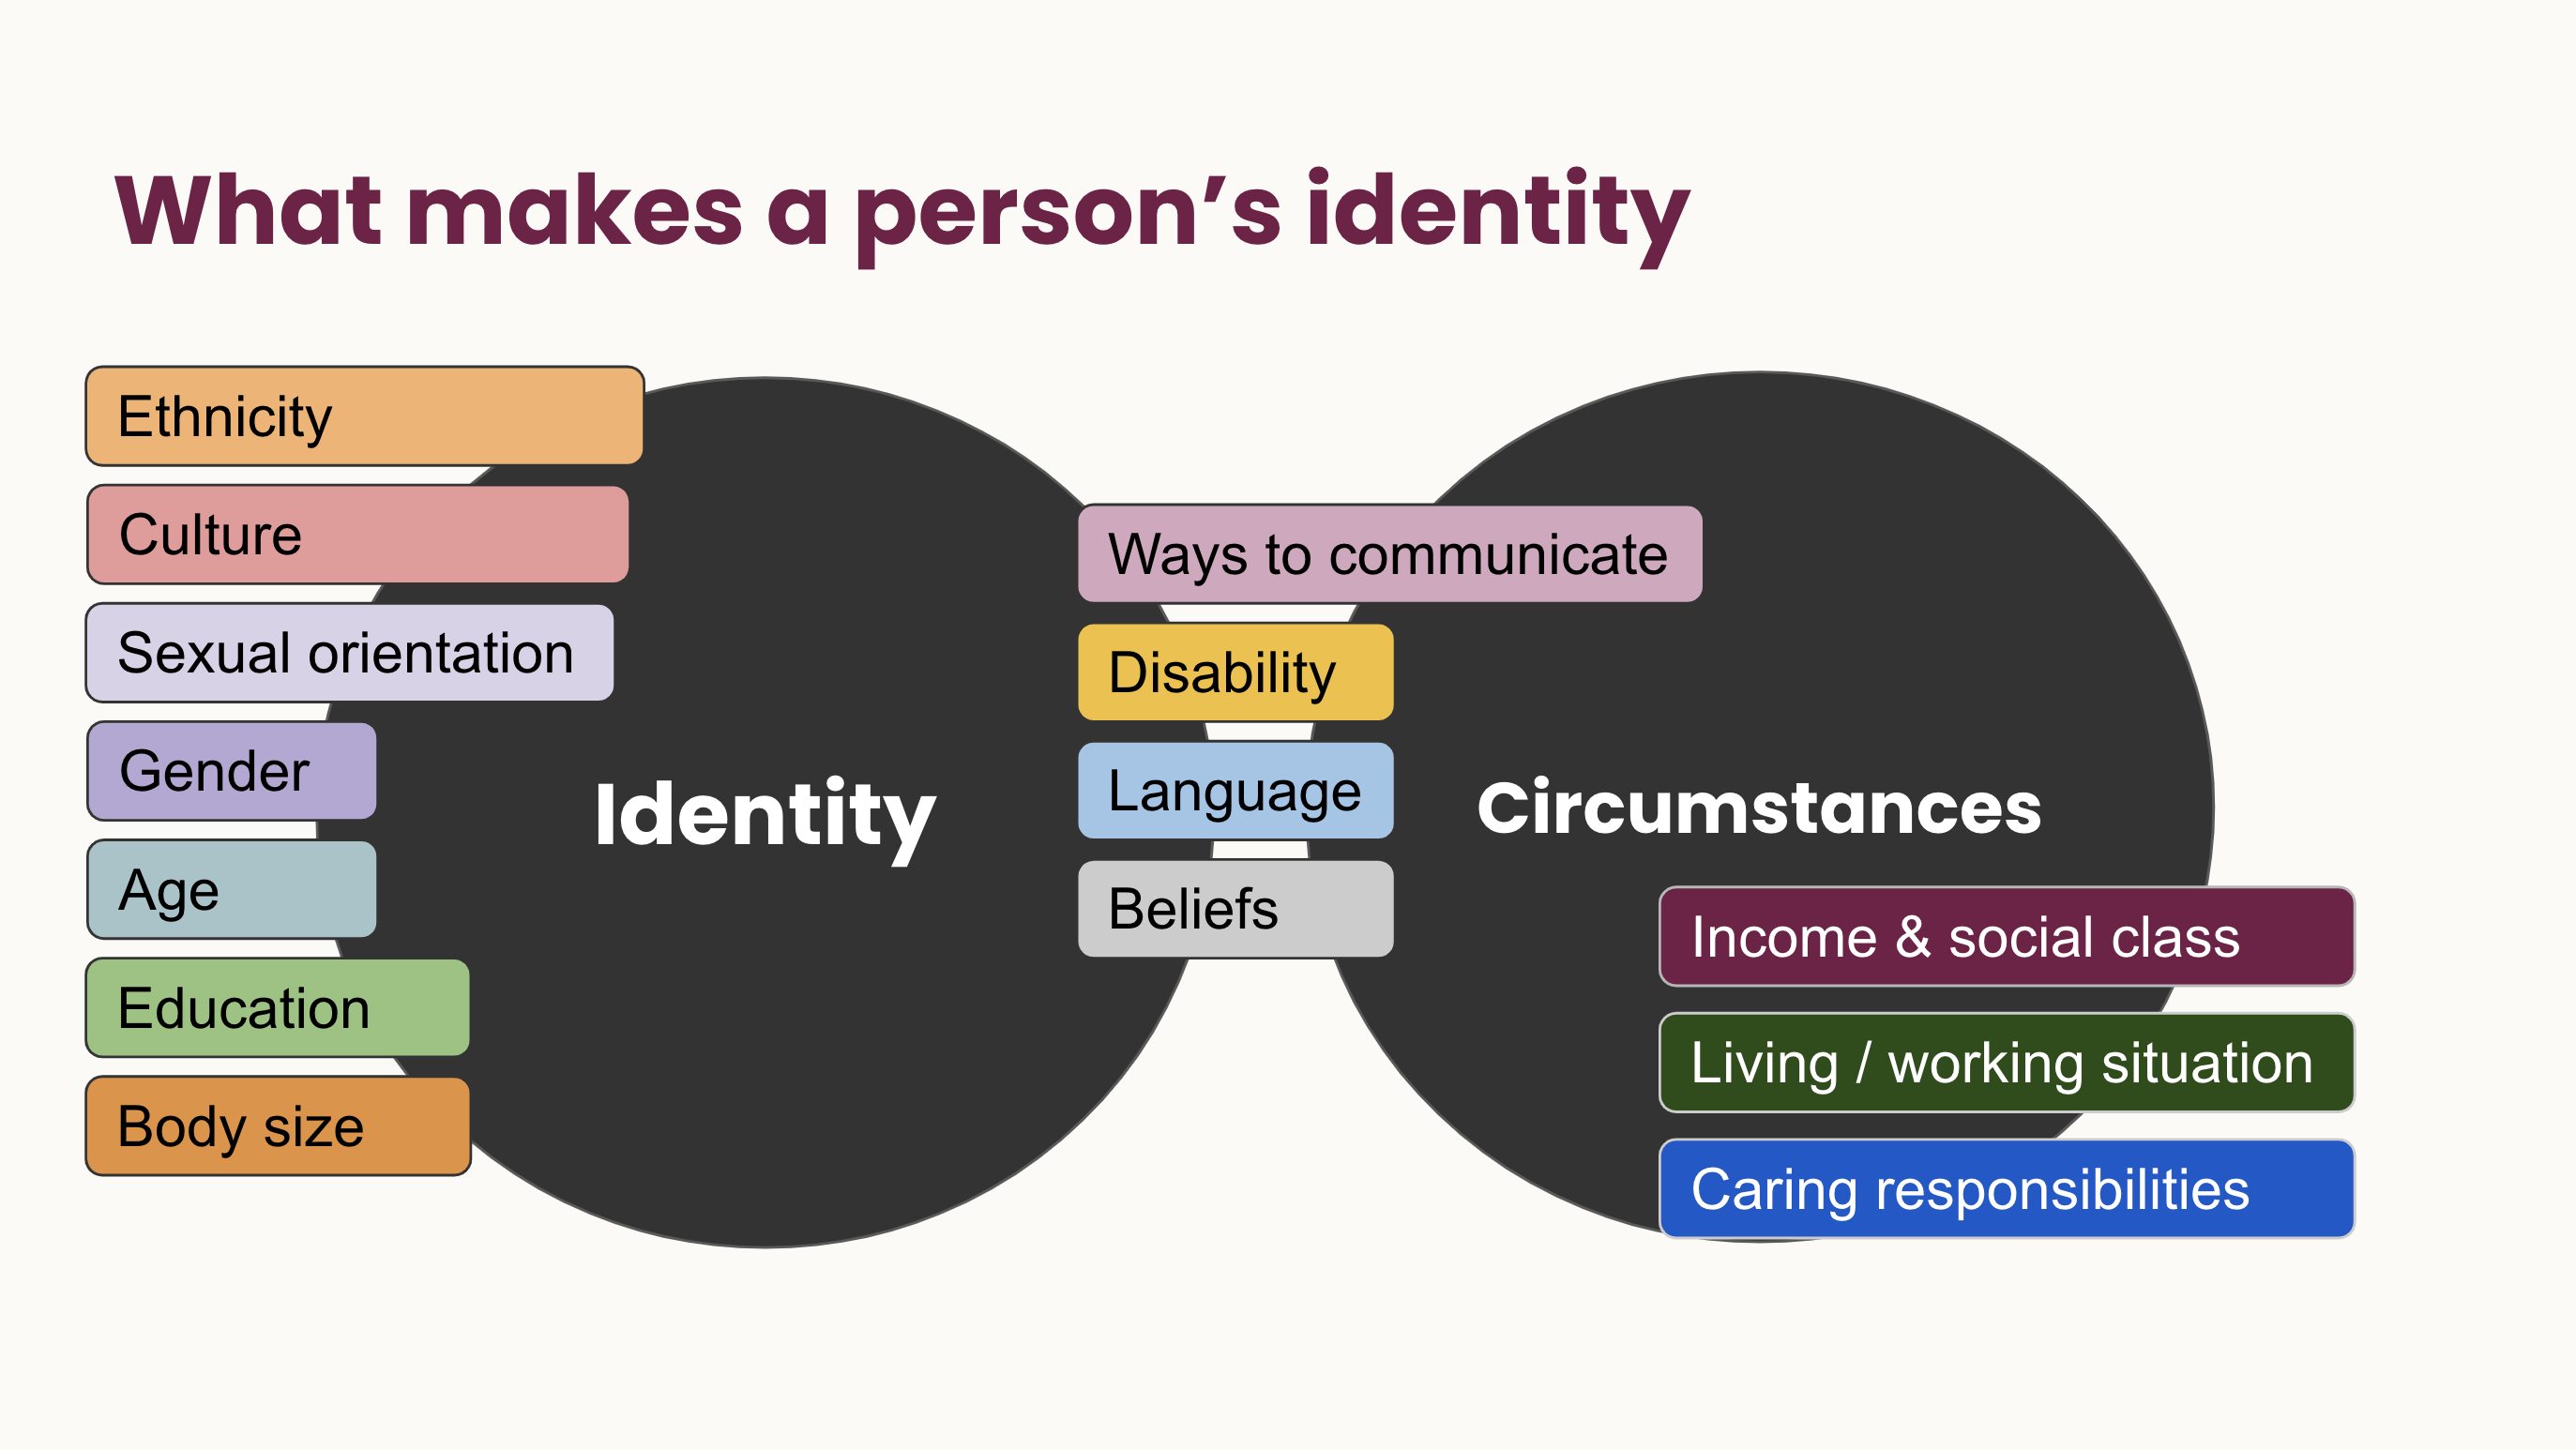 A chart showing what makes a persons identity and defines their circumstances